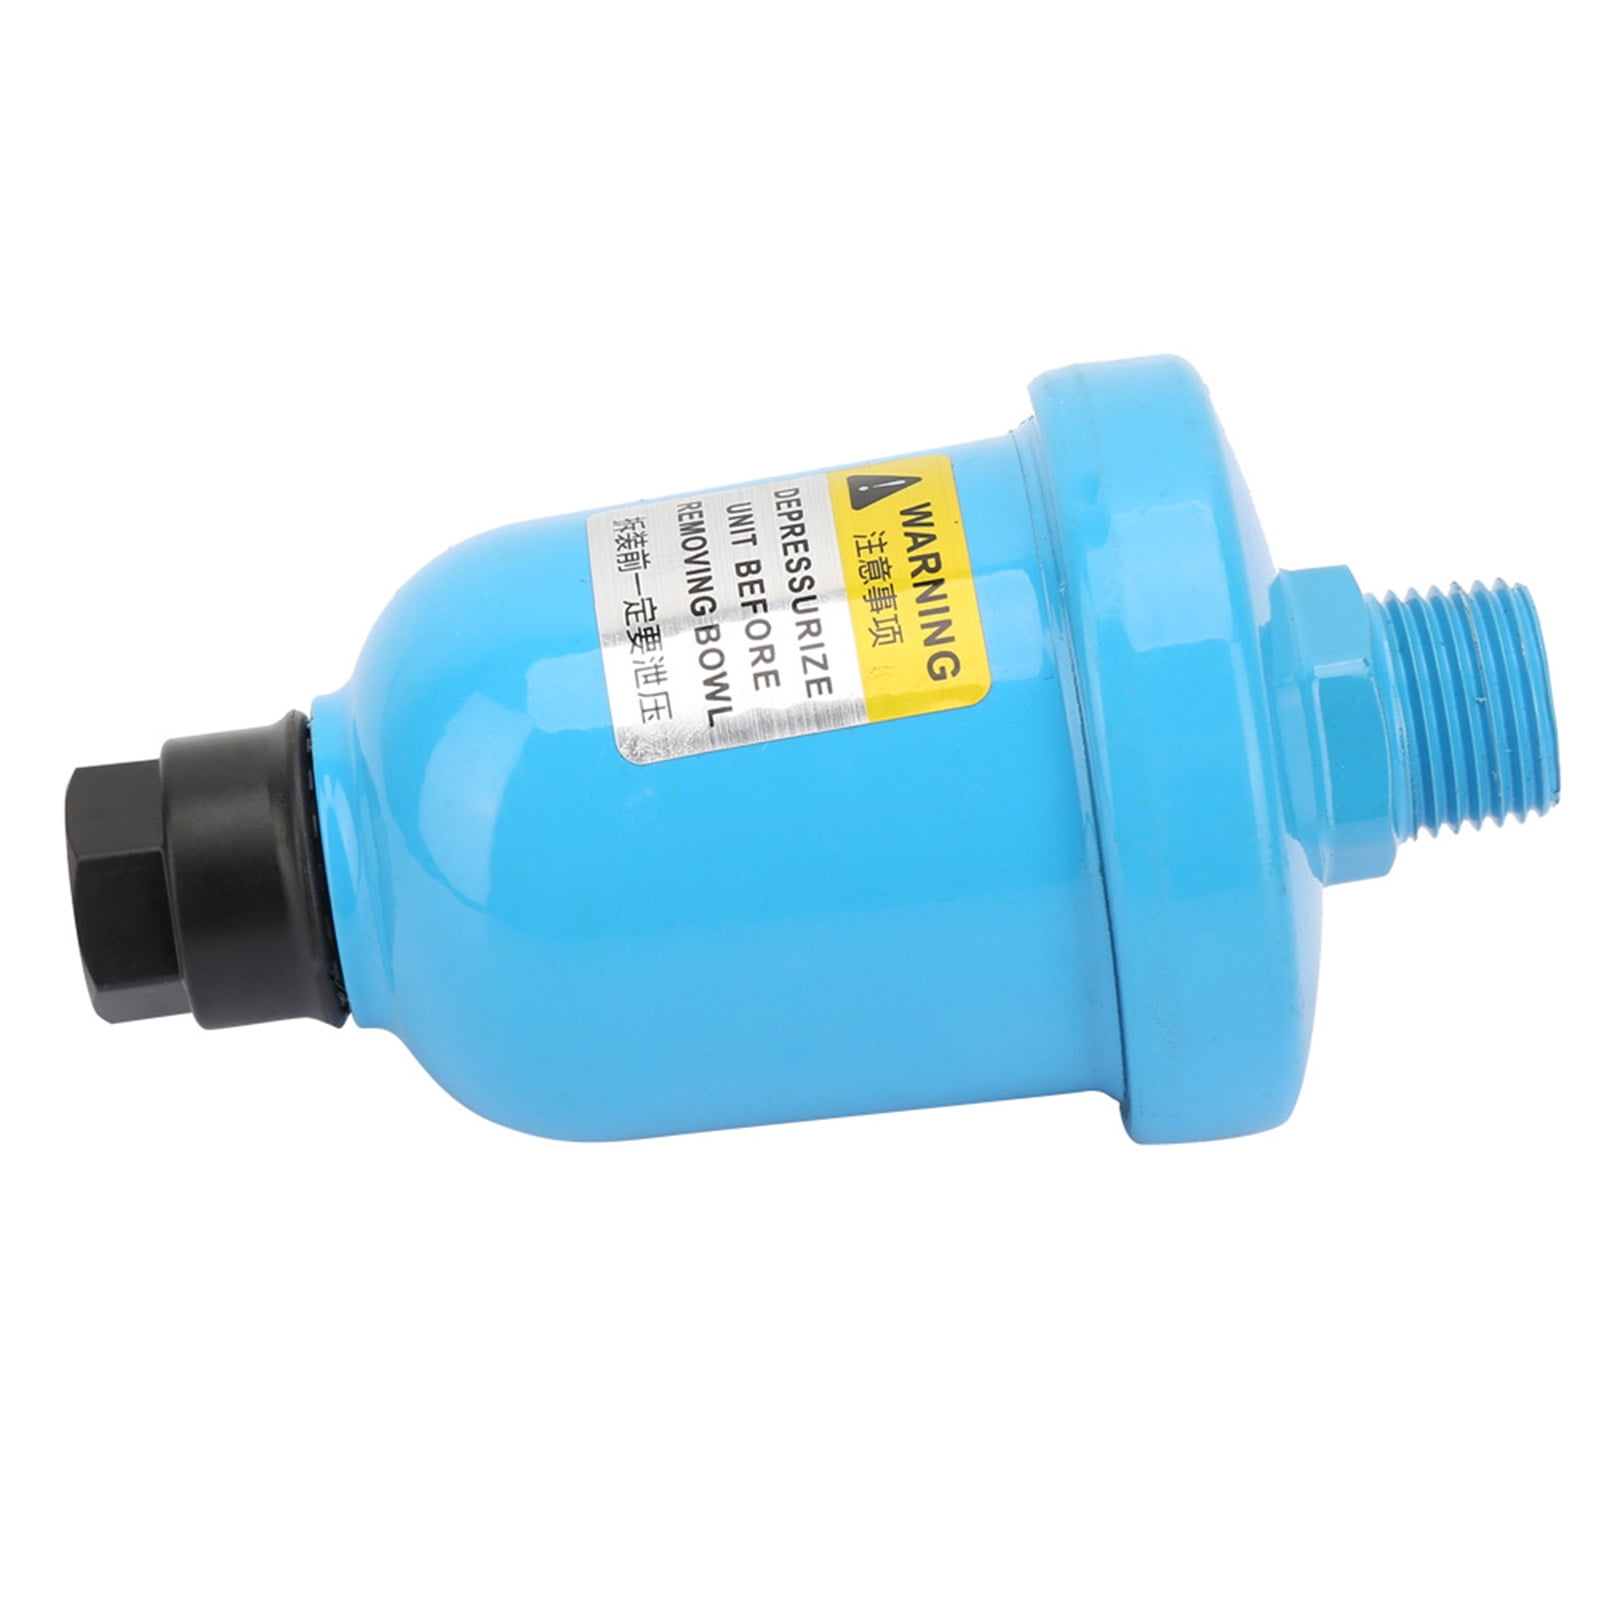 Auto Drain Valve 1.0Mpa G1/2 for Compressed Air Storage Tanks Die-Cast Aluminum 0.2~1.0Mpa 5-60℃ Durable Automatic Drainer 